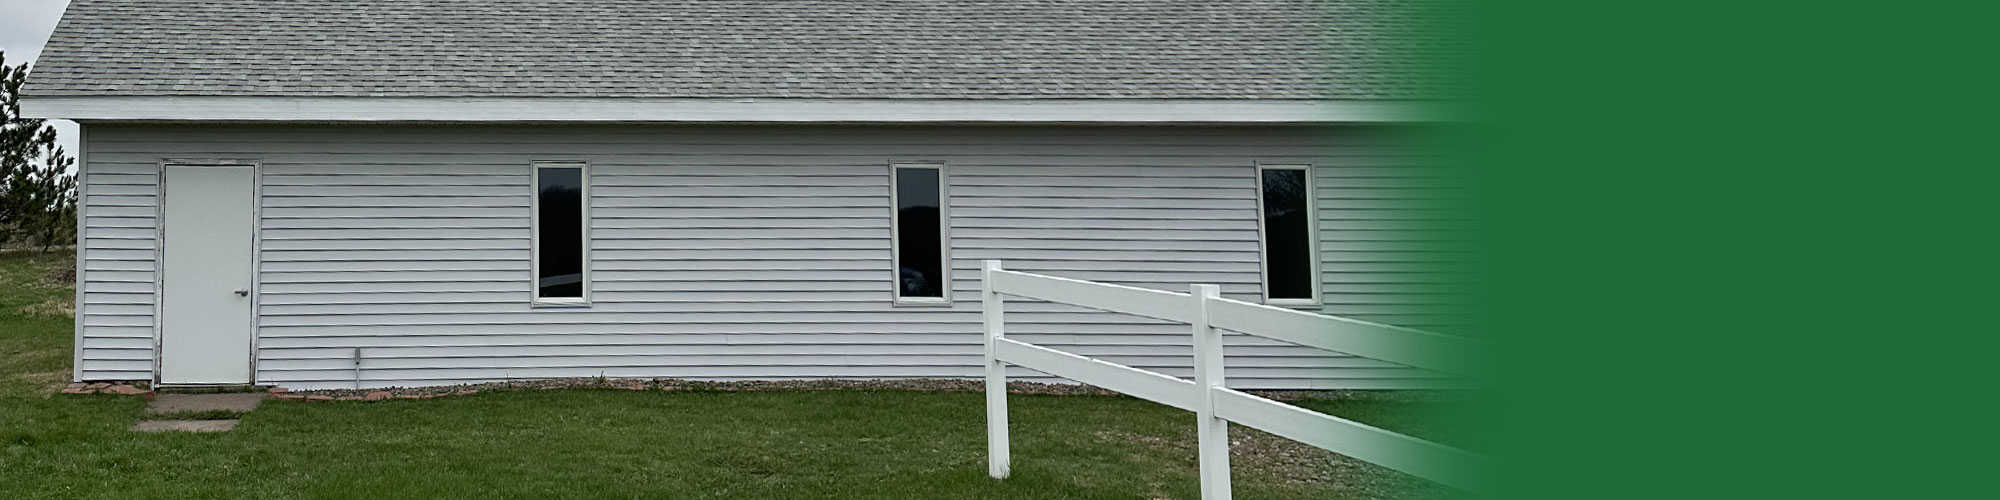 Siding and Windows - Brightview Windows, Doors and More - Wisconsin, window replacement, patio doors, home remodeling, construction